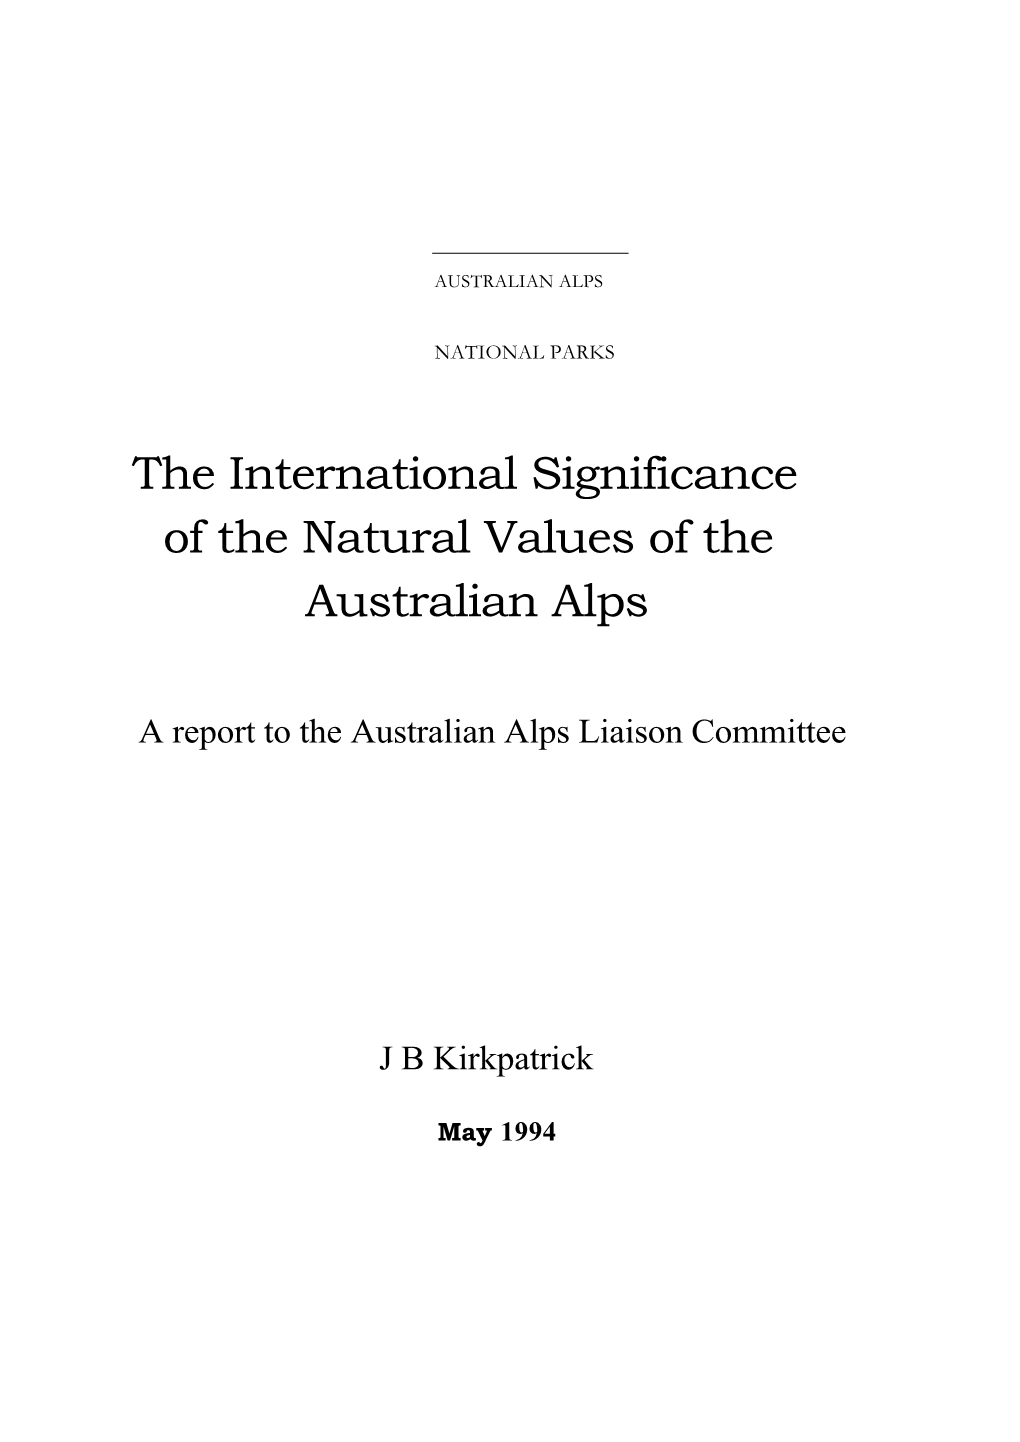 The International Significance of the Natural Values of the Australian Alps